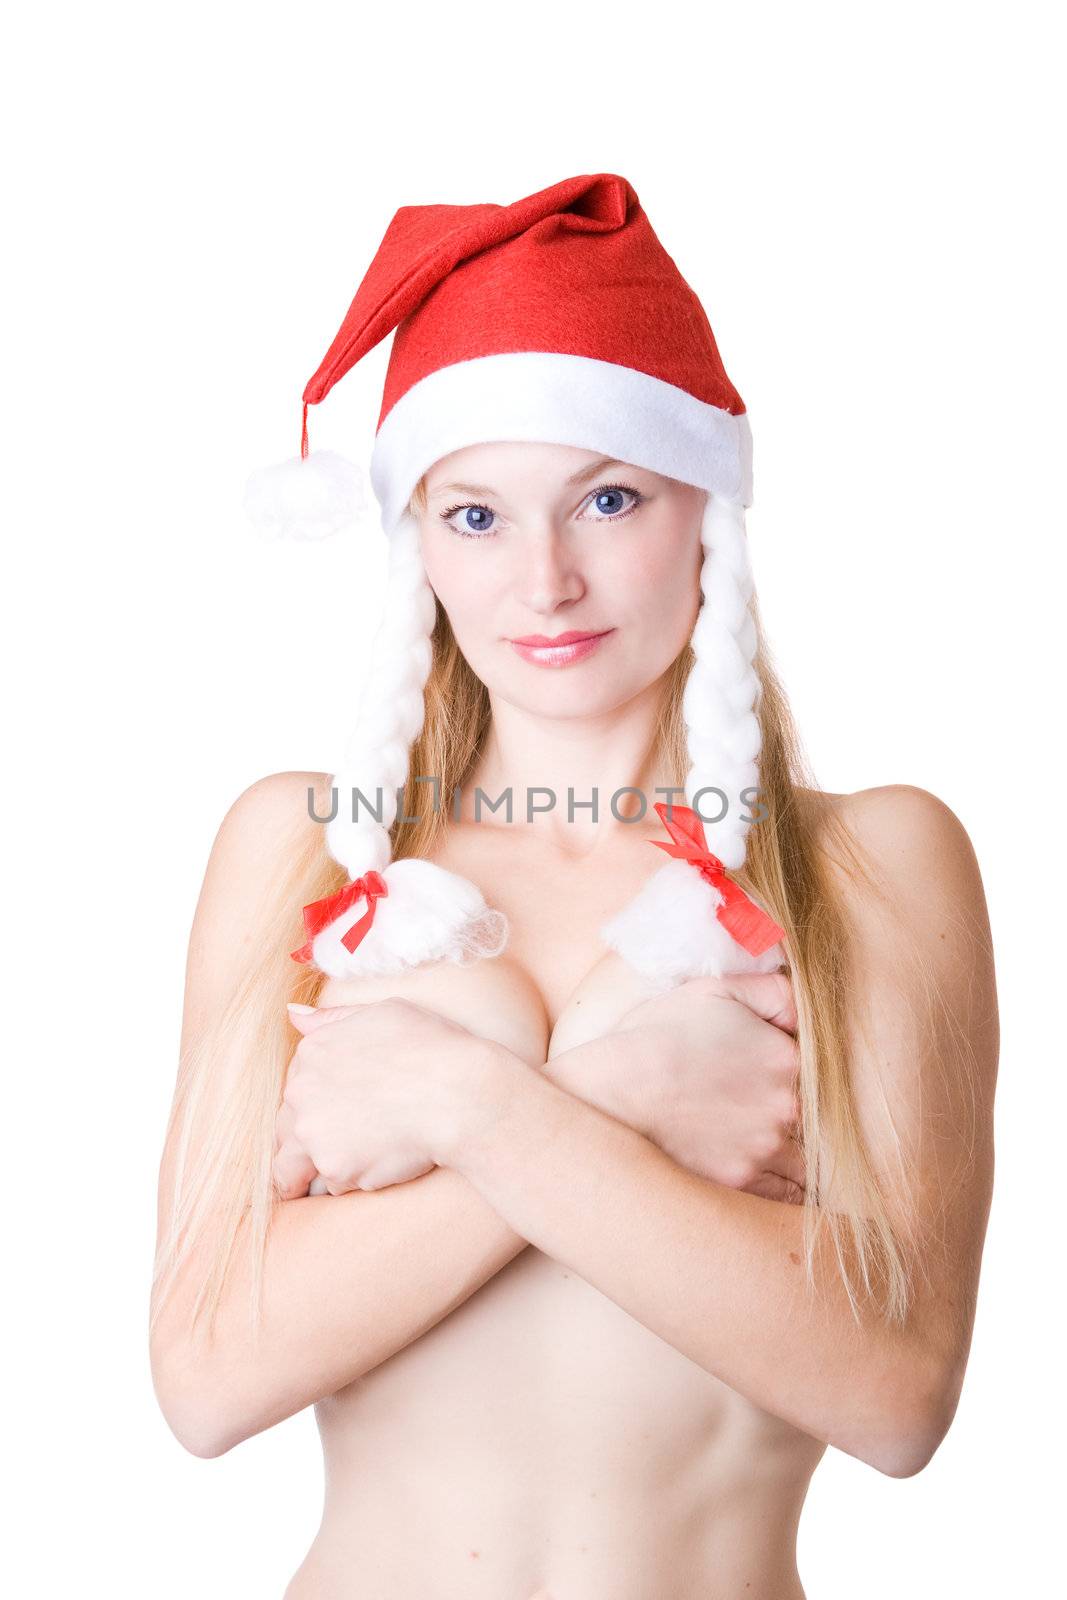 Naked woman in red Christmas cap